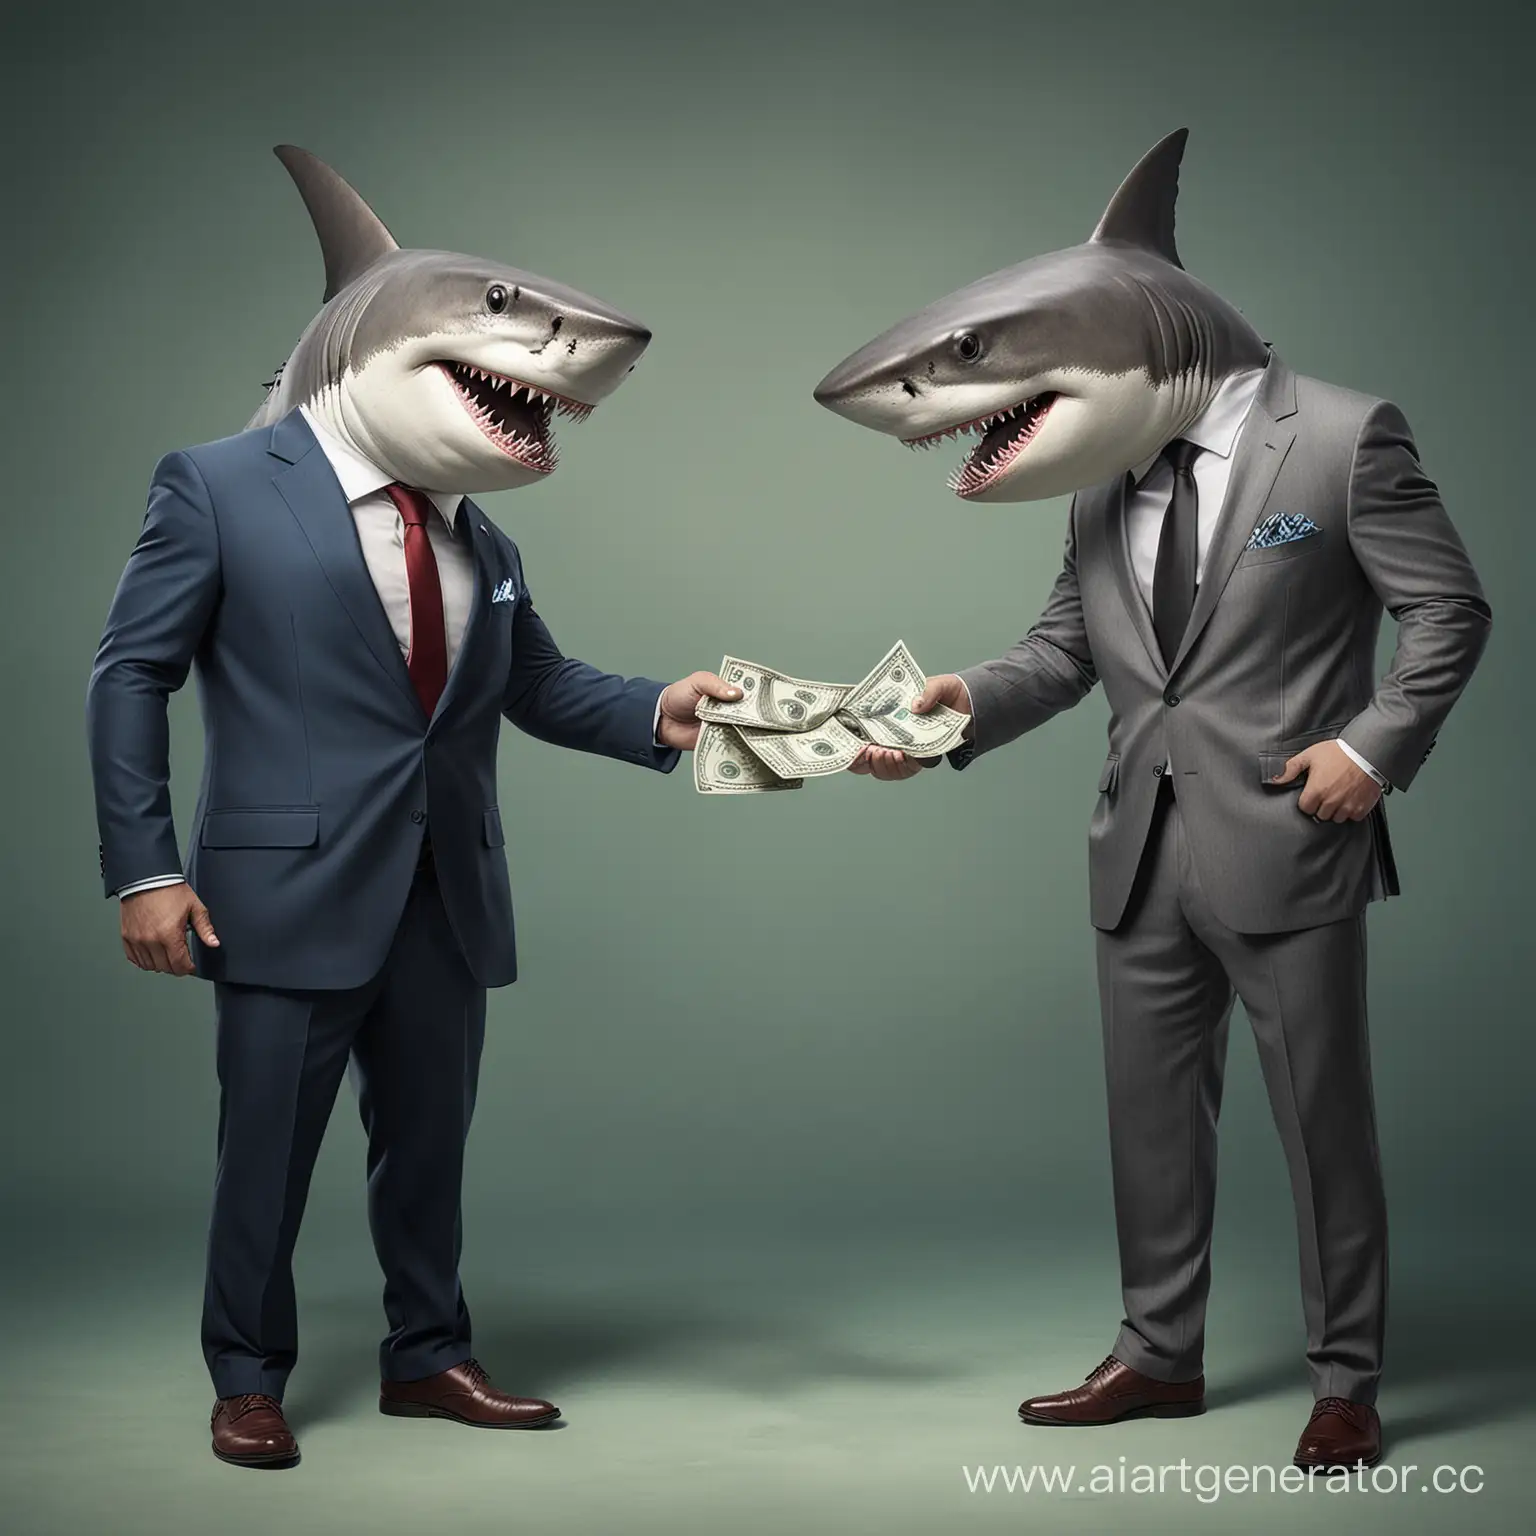 Corporate-Sharks-in-Business-Suits-Exchanging-Money